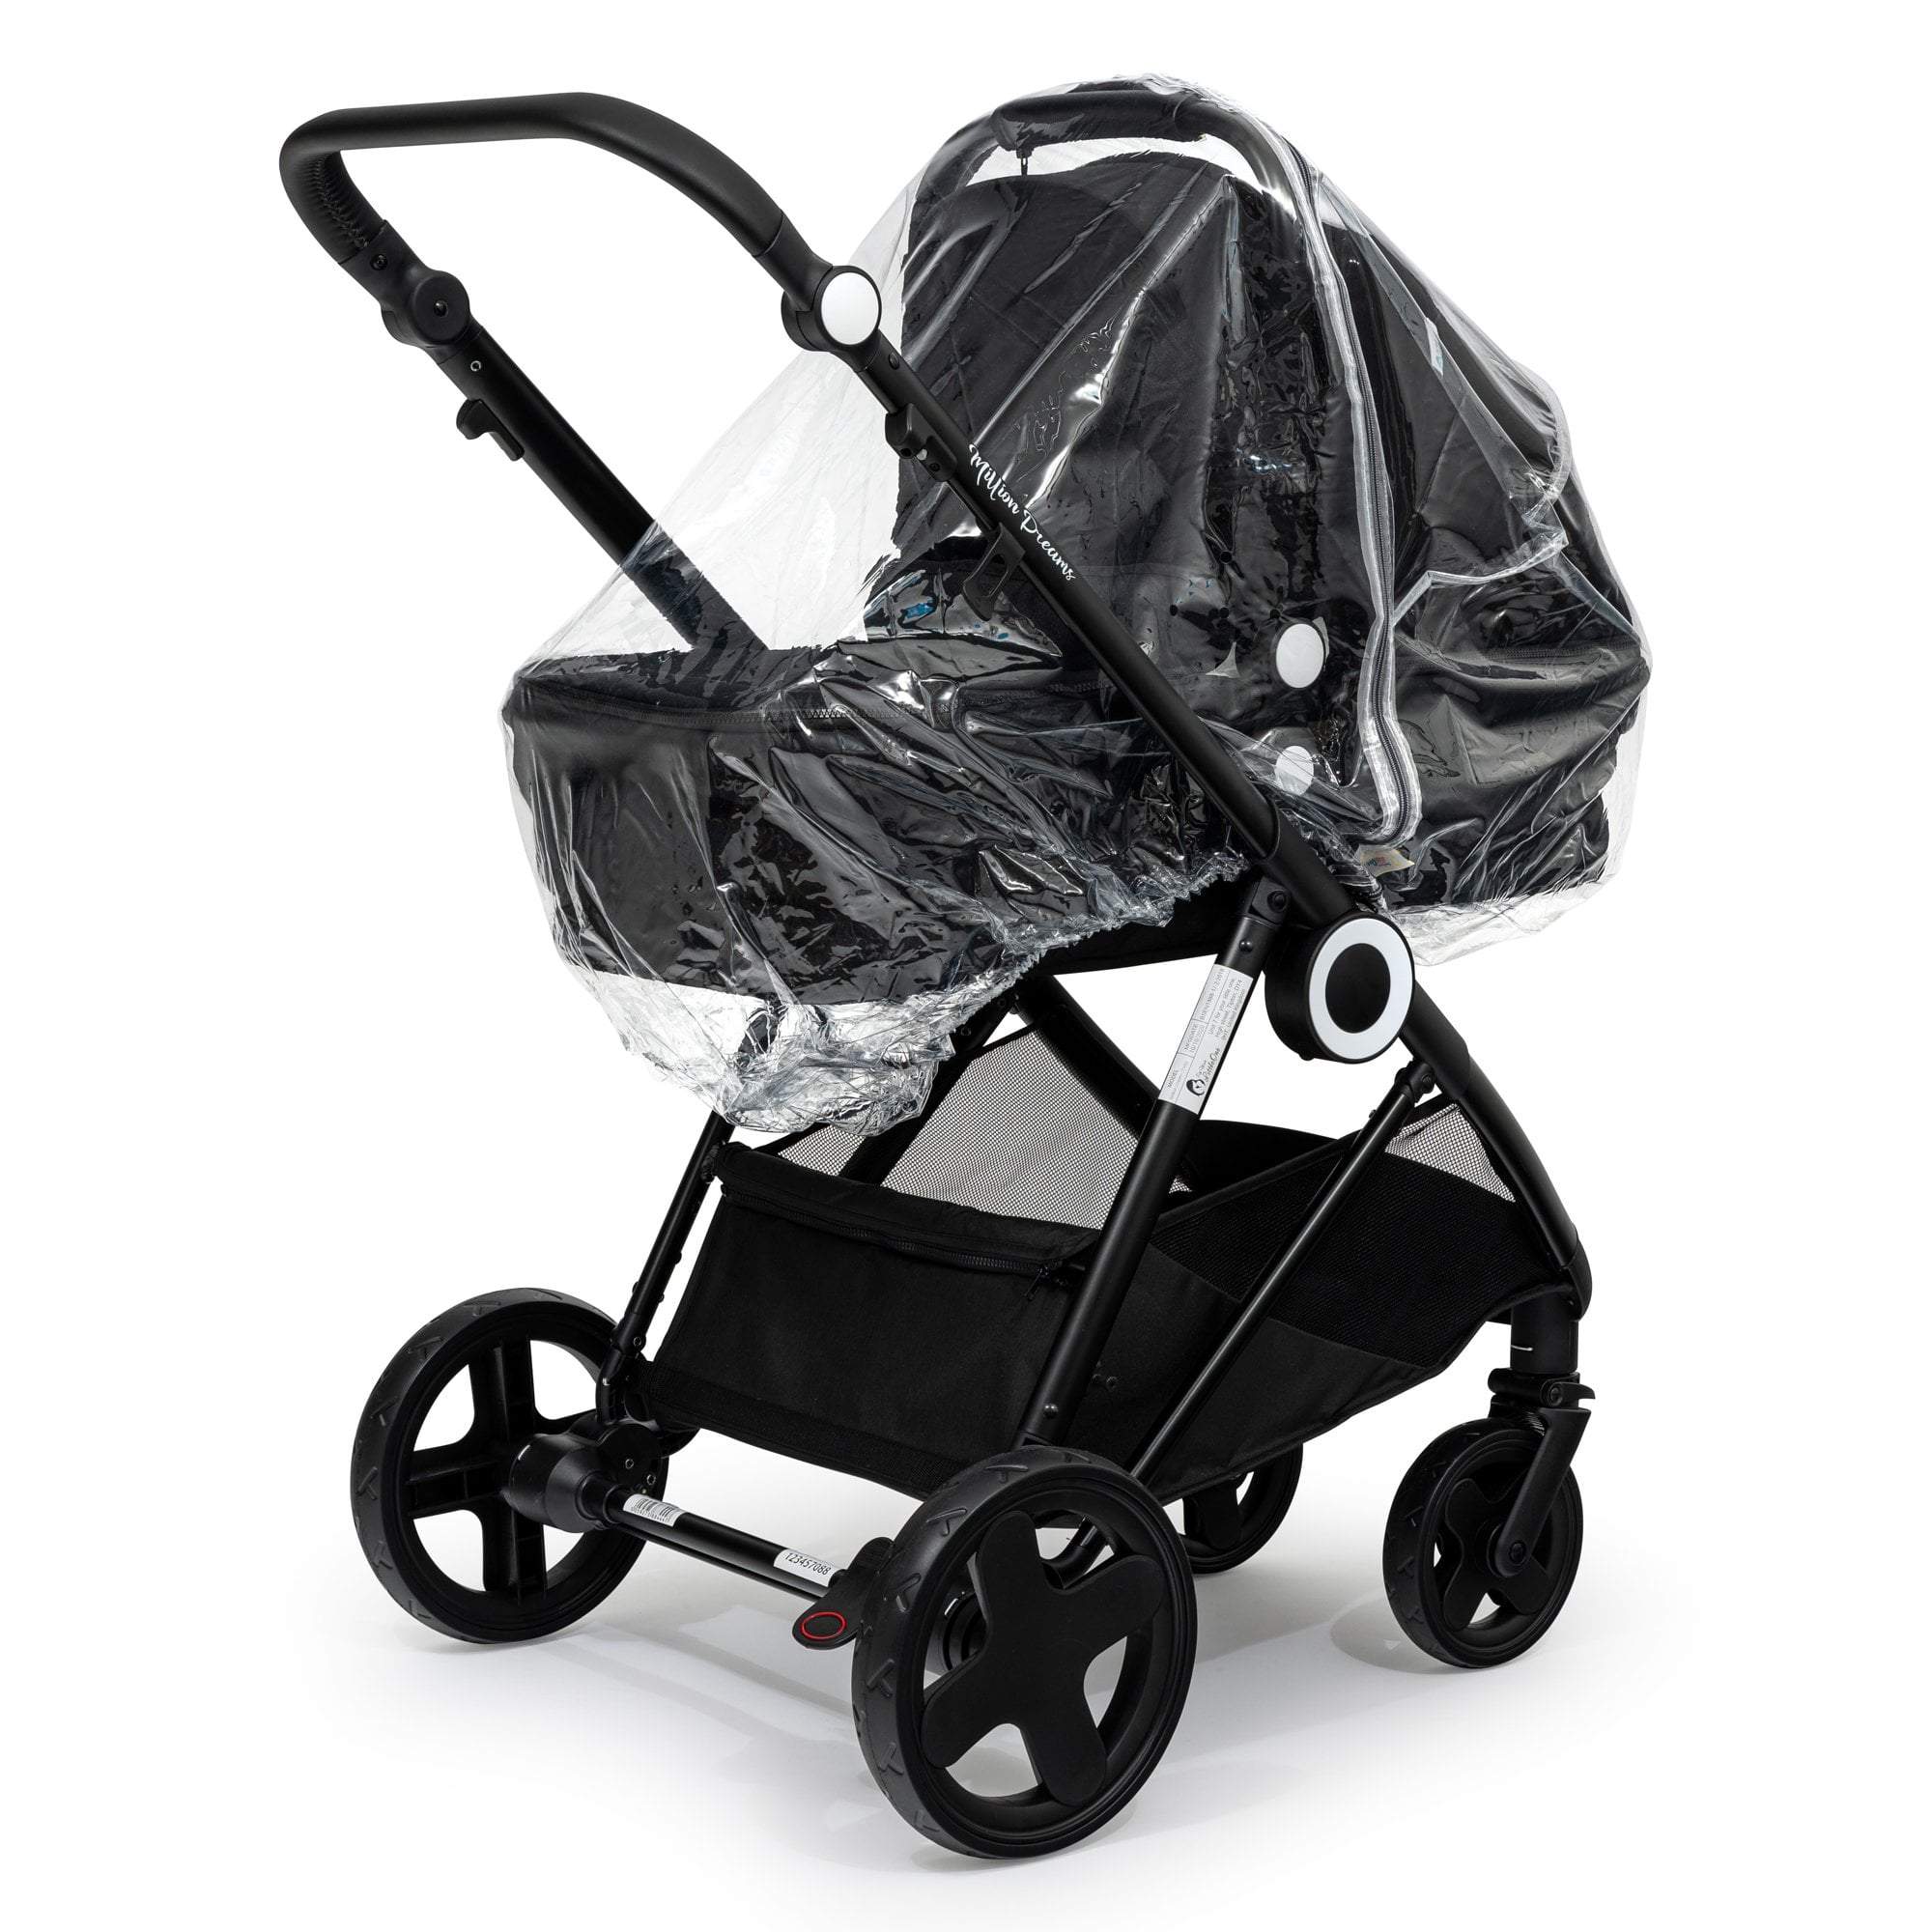 Carrycot Raincover Compatible With Tippitoes - Fits All Models - For Your Little One